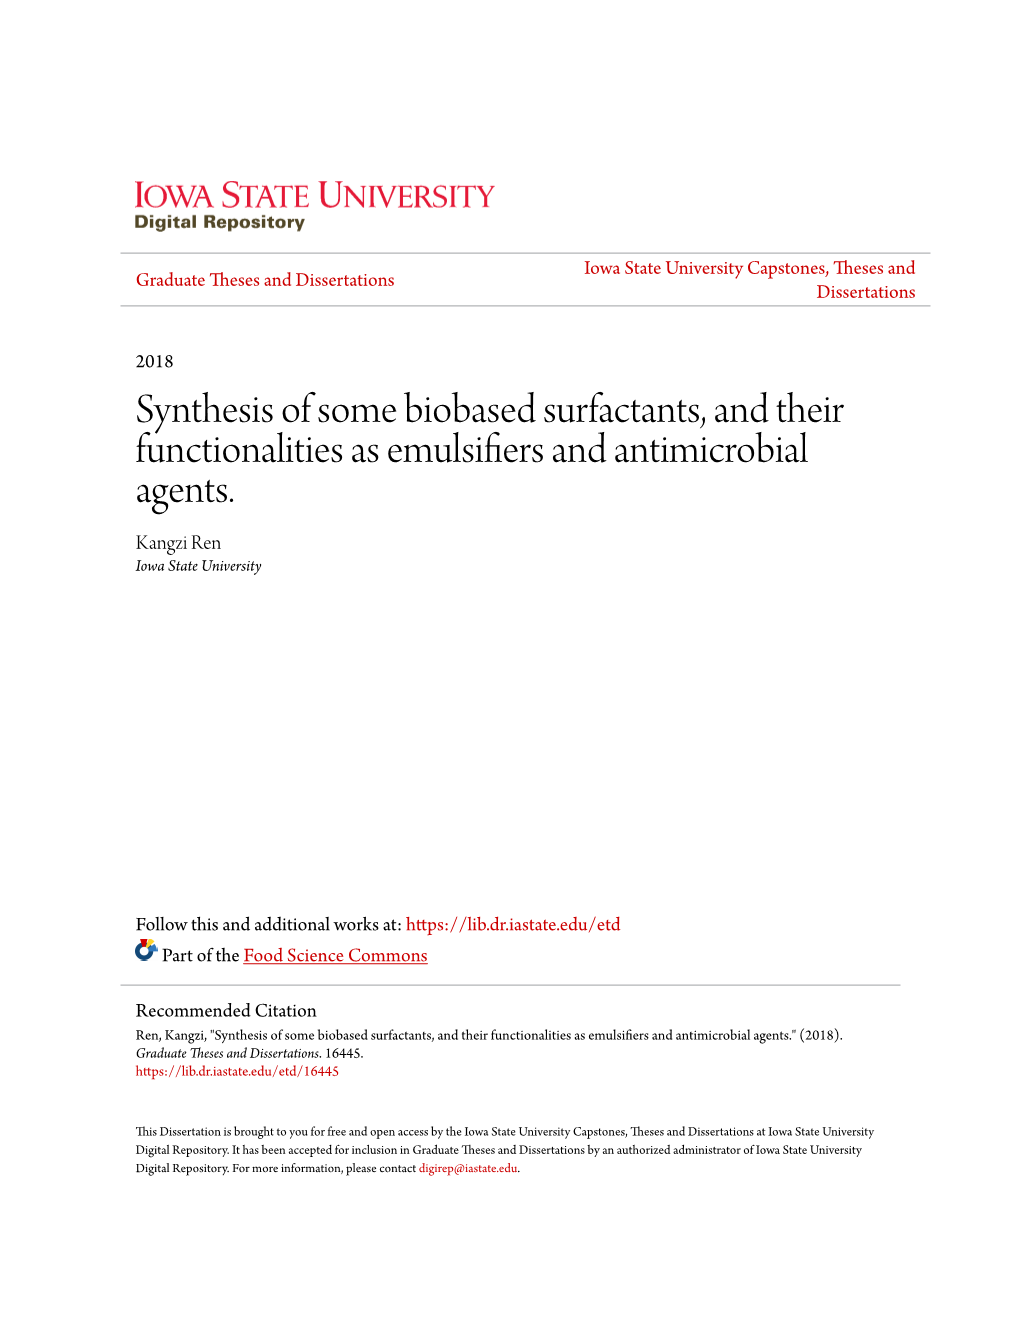 Synthesis of Some Biobased Surfactants, and Their Functionalities As Emulsifiers and Antimicrobial Agents. Kangzi Ren Iowa State University